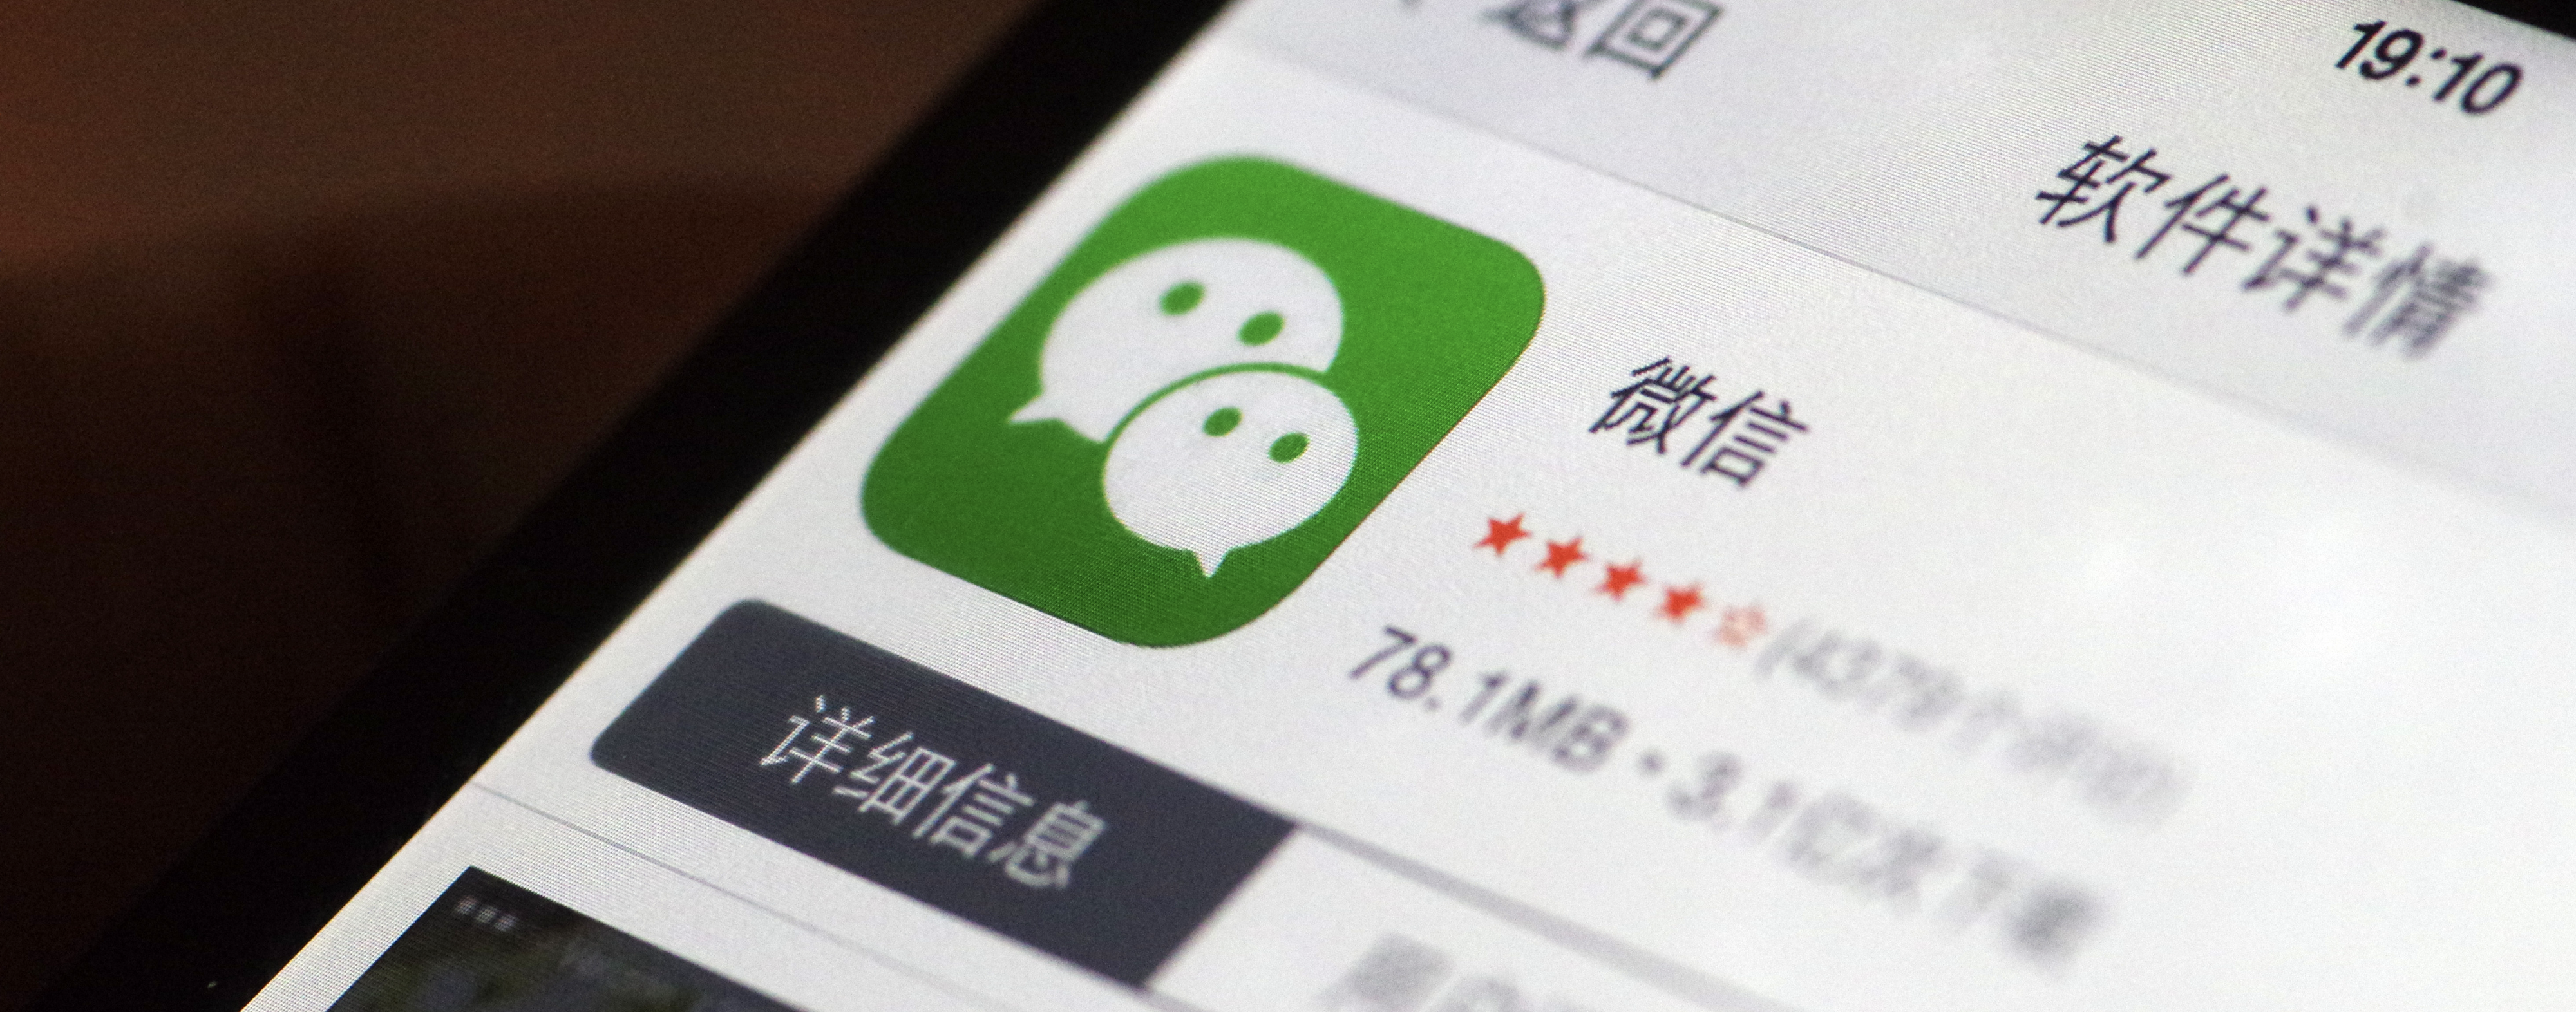 China-linked WeChat accounts spread disinformation in advance of 2021 Canadian election